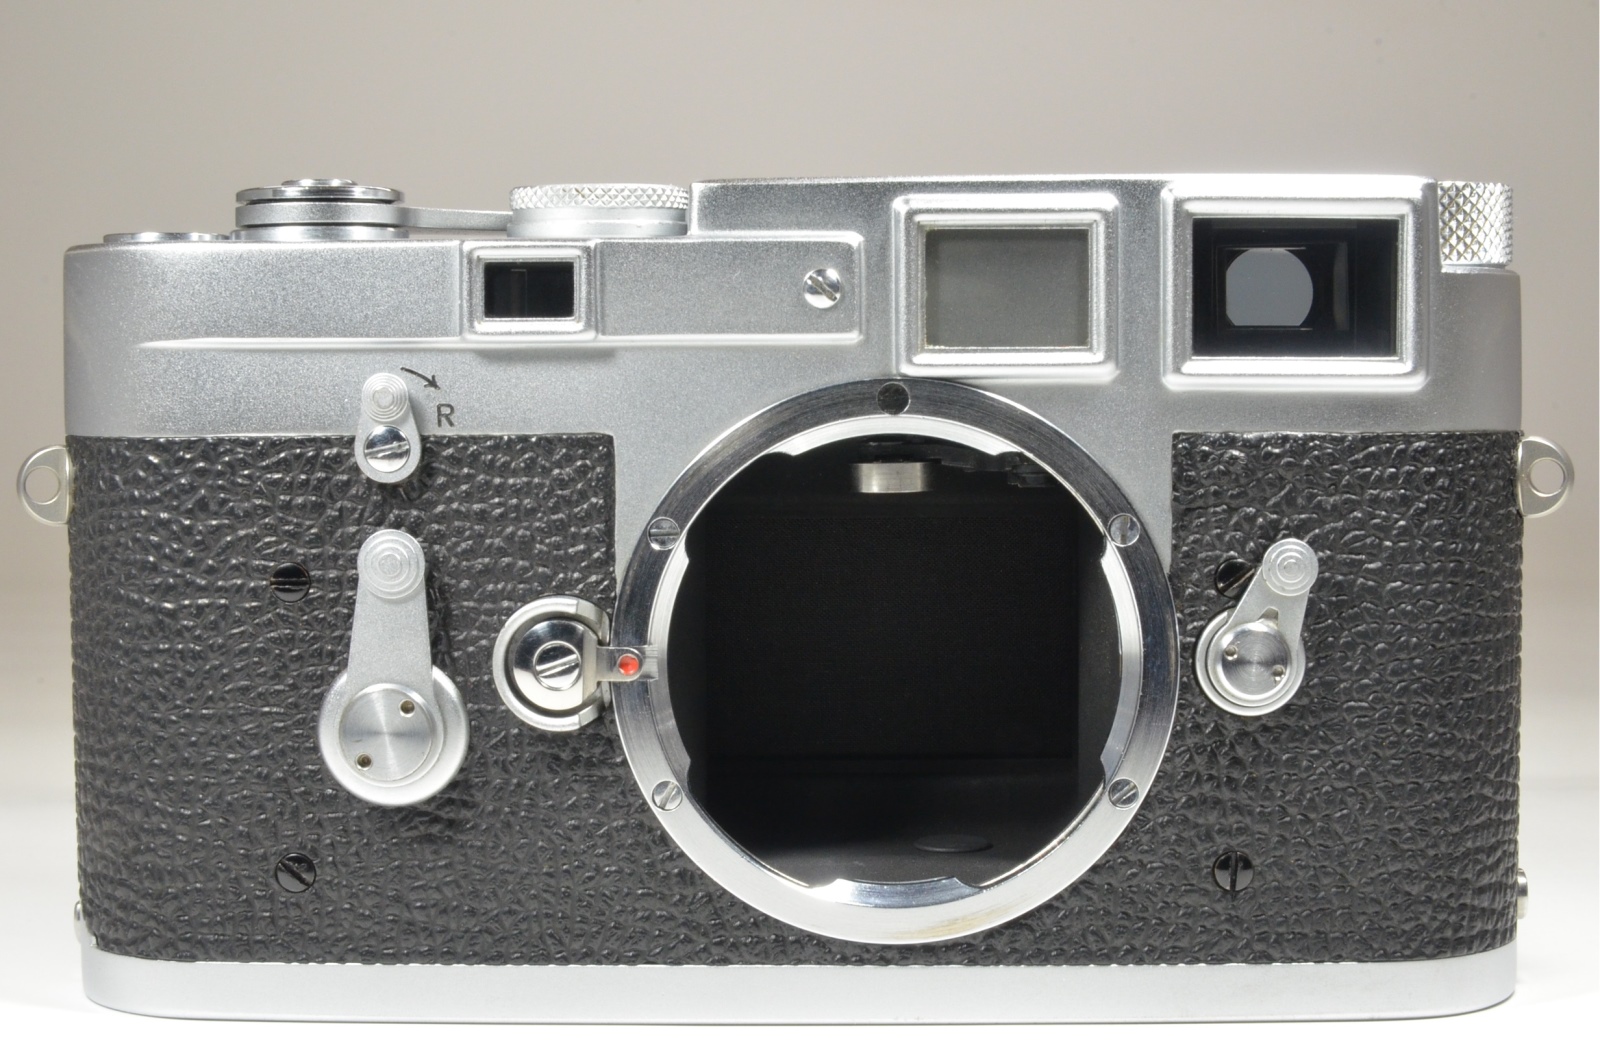 leica m3 single stroke s/n 1111009 year 1965 with strap